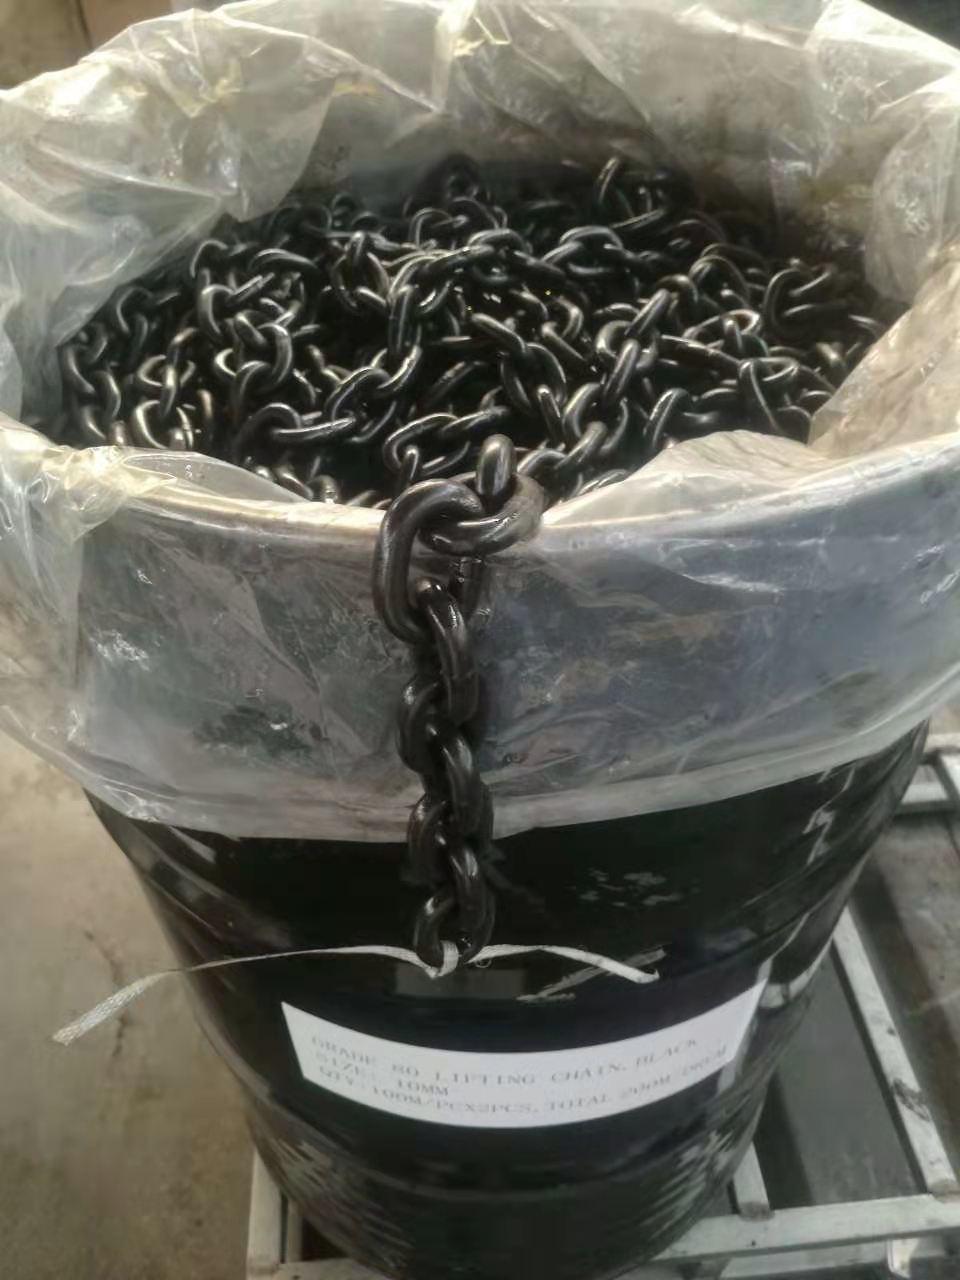 Chinese Brand Link Chain with Black Color (K0310)